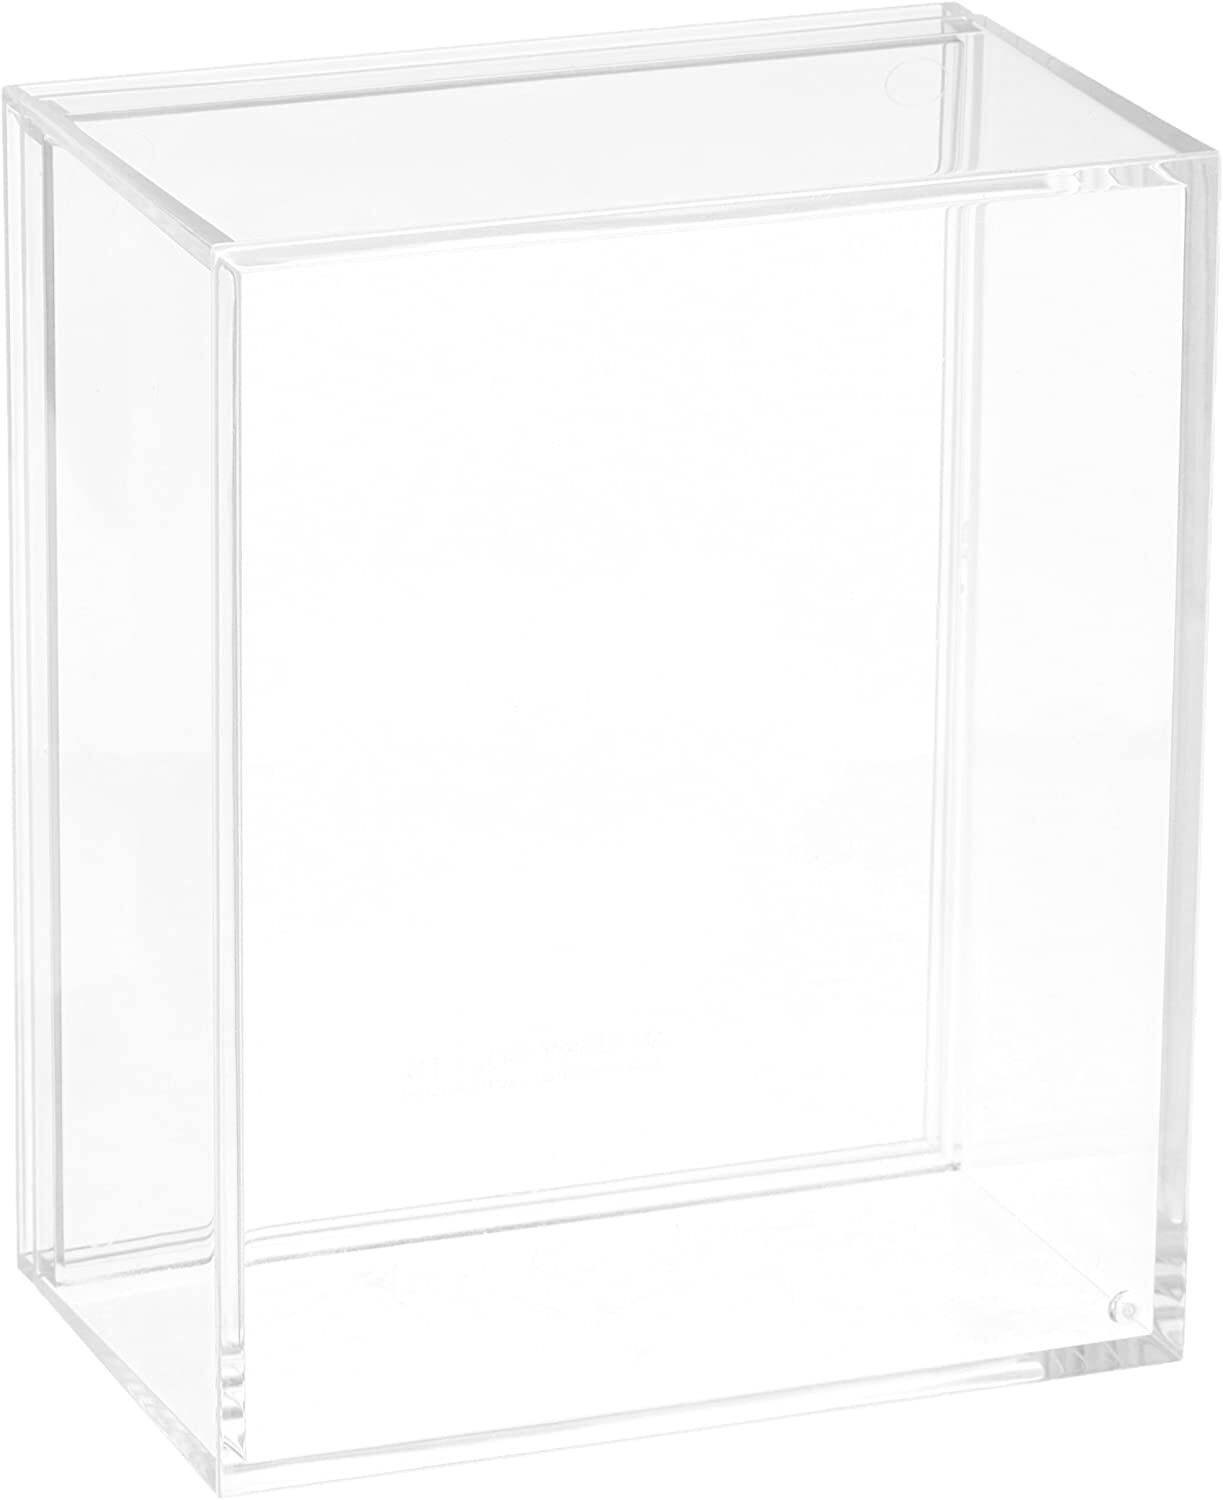 (PAPER THEATER) PAPER THEATER DISPLAY CASE